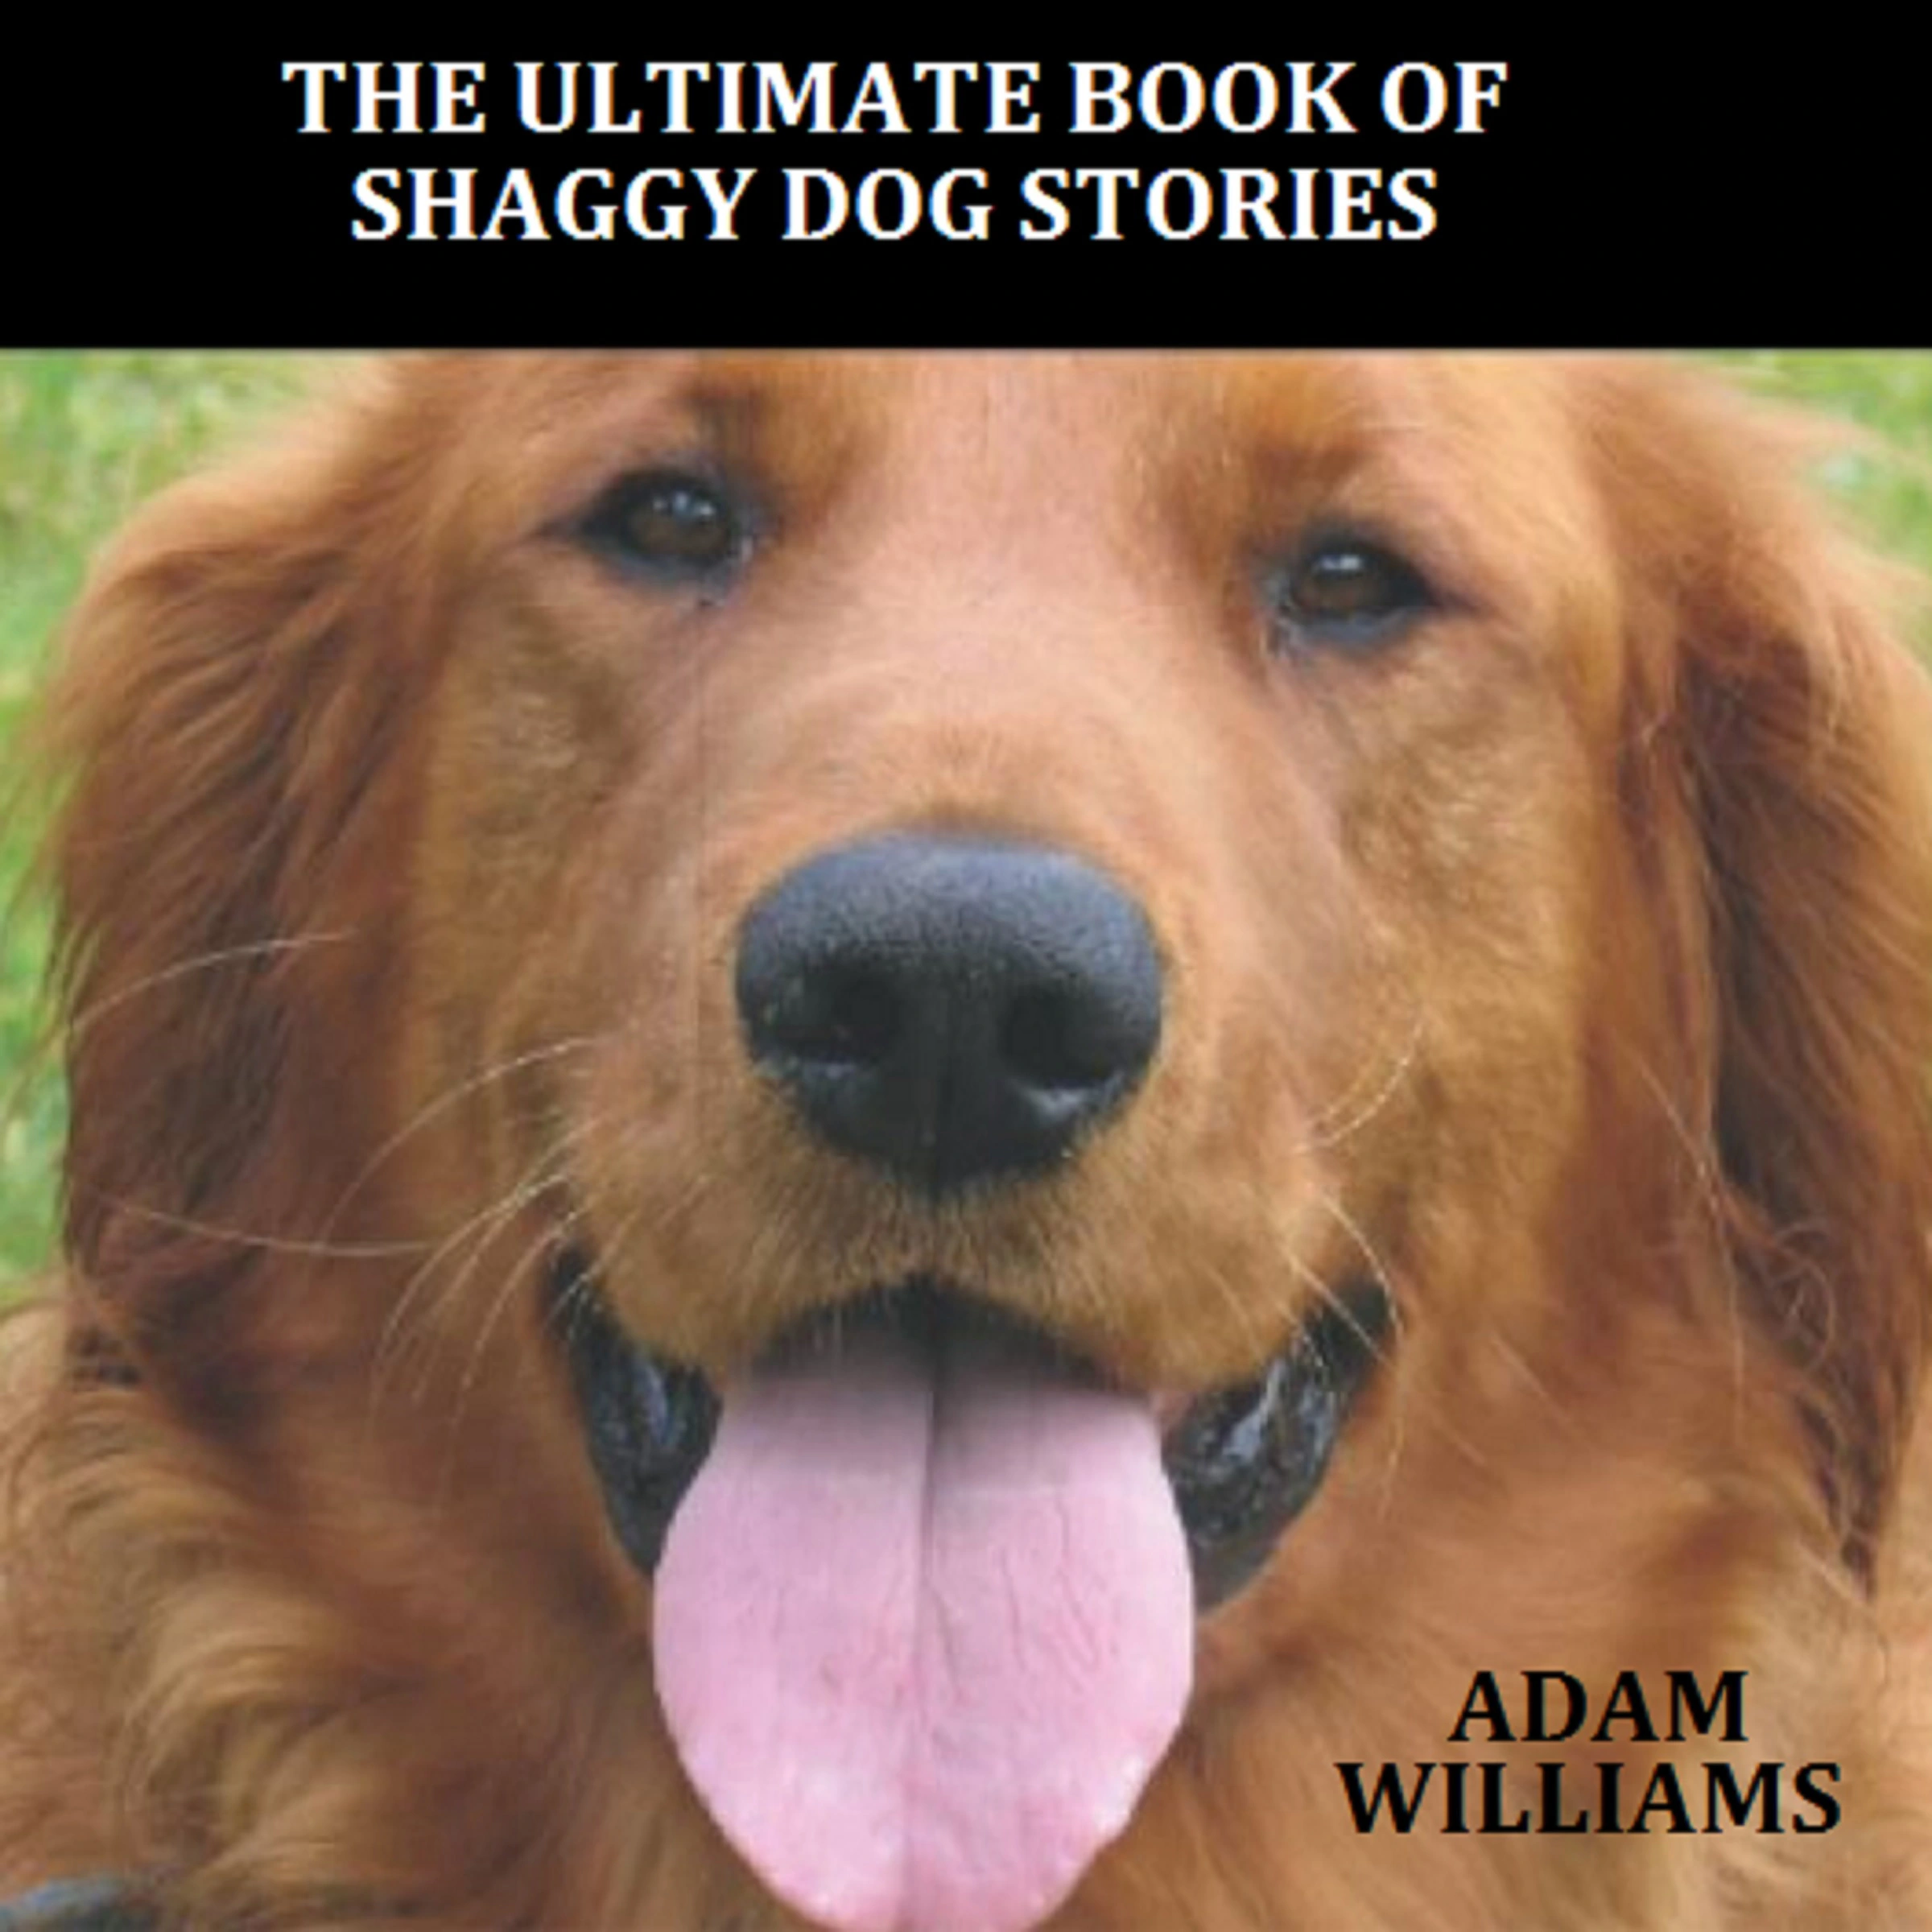 The Ultimate Book of Shaggy Dog Stories by Adam Williams Audiobook